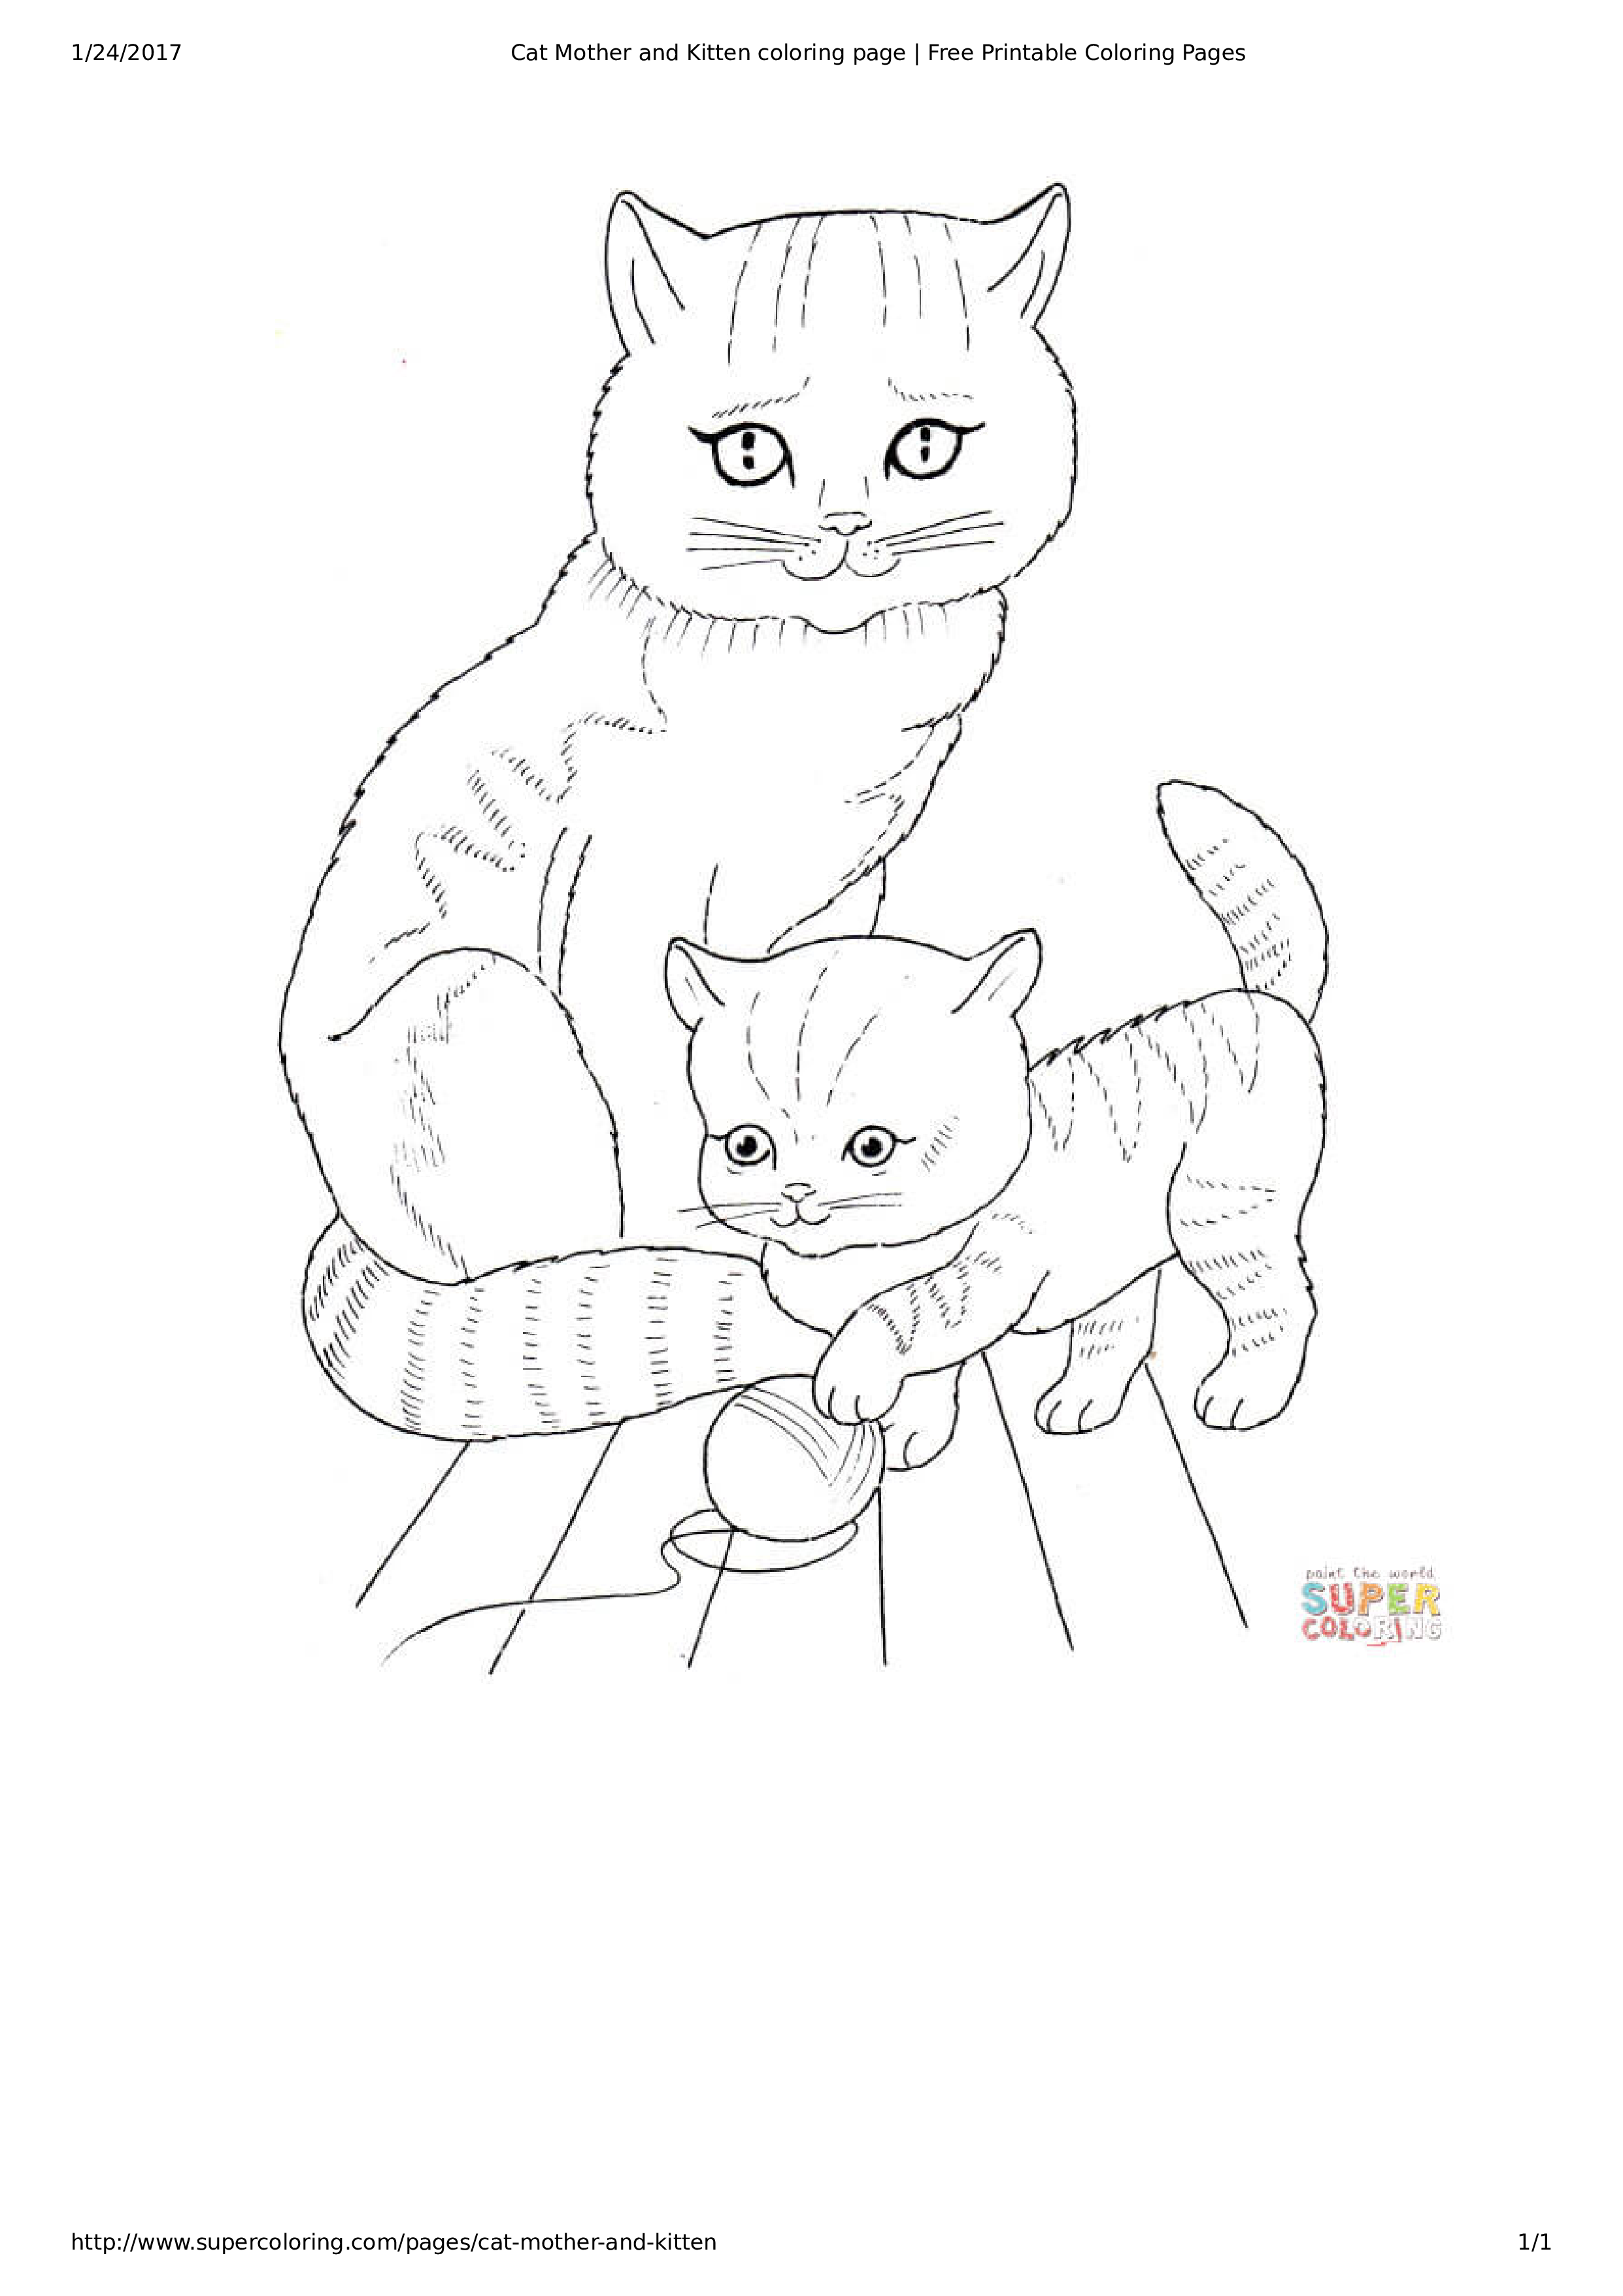 Cat And Kitten Coloring Page How To Create A Cat And Kitten Coloring Page Download This Cat And Kitt Puppy Coloring Pages Cat Coloring Page Kittens Coloring